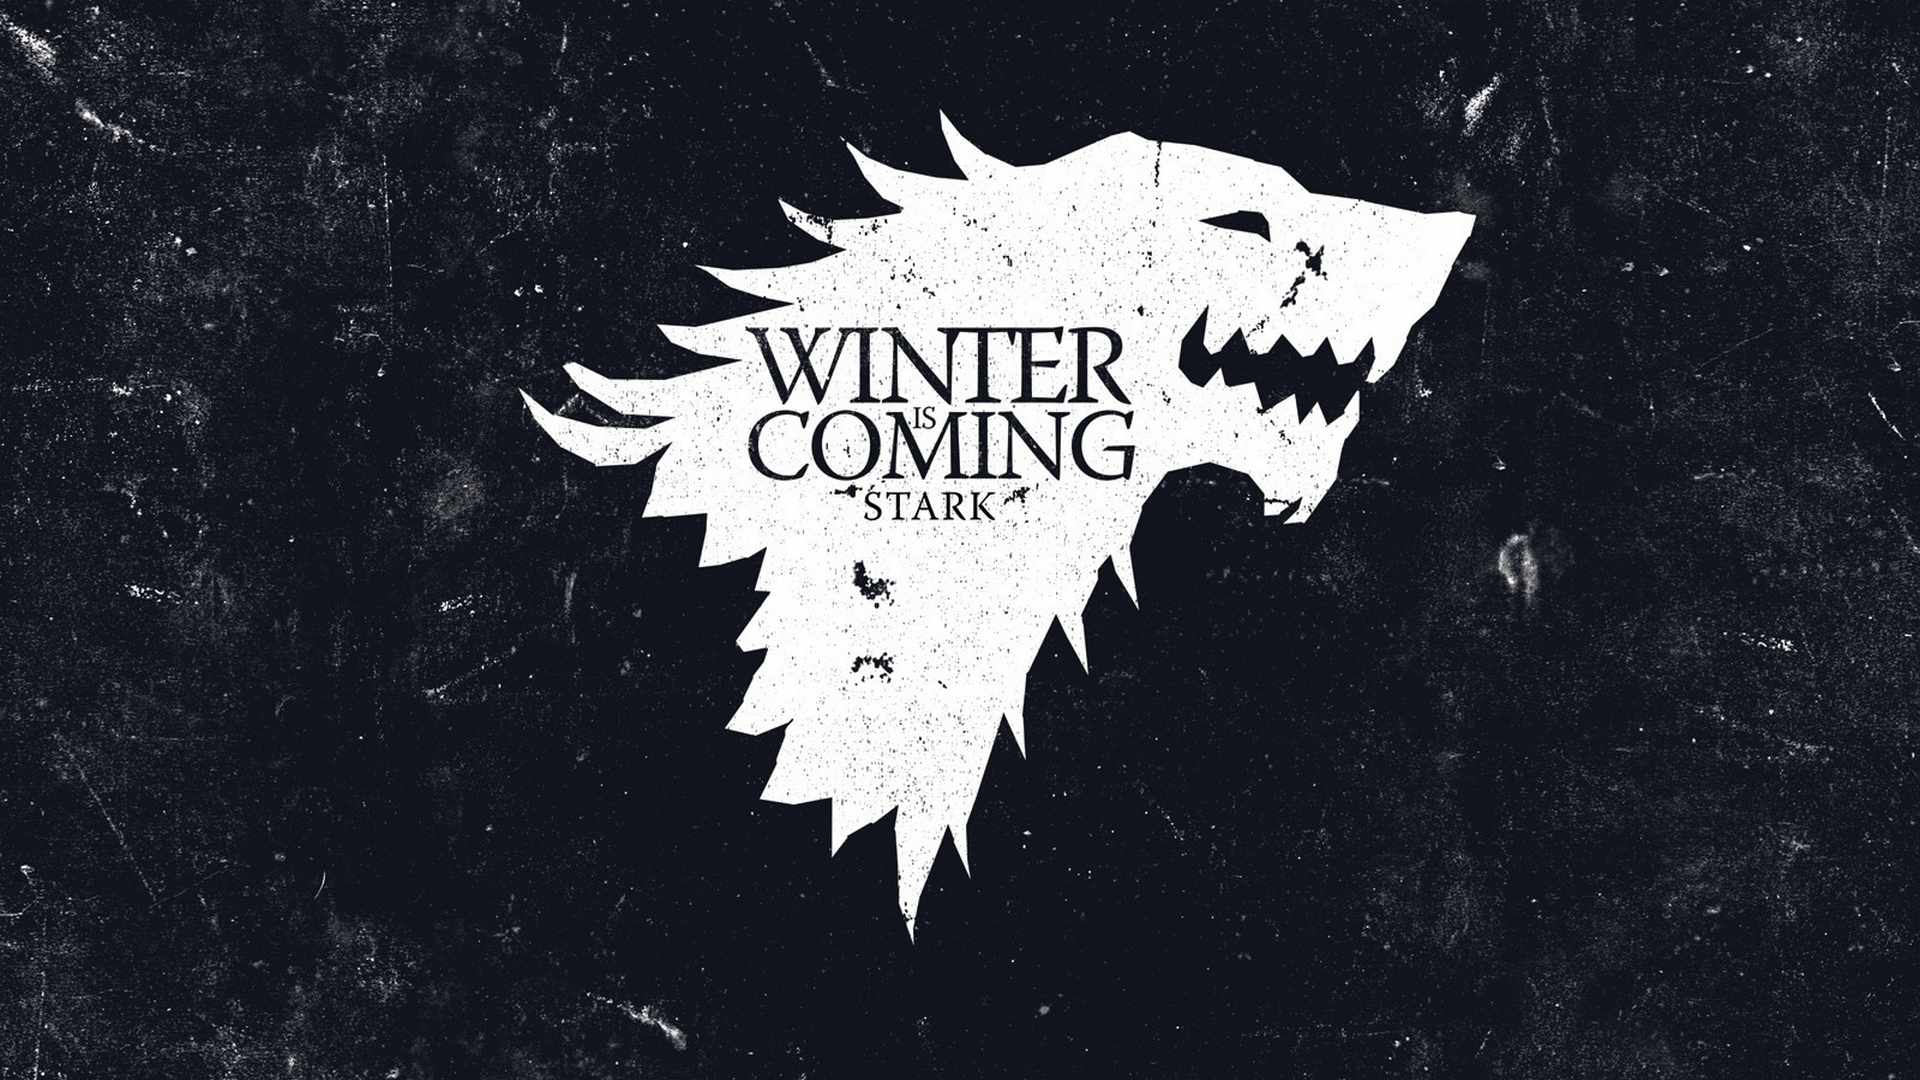 Winter Is Ing Game Of Thrones Background HD Wallpaper